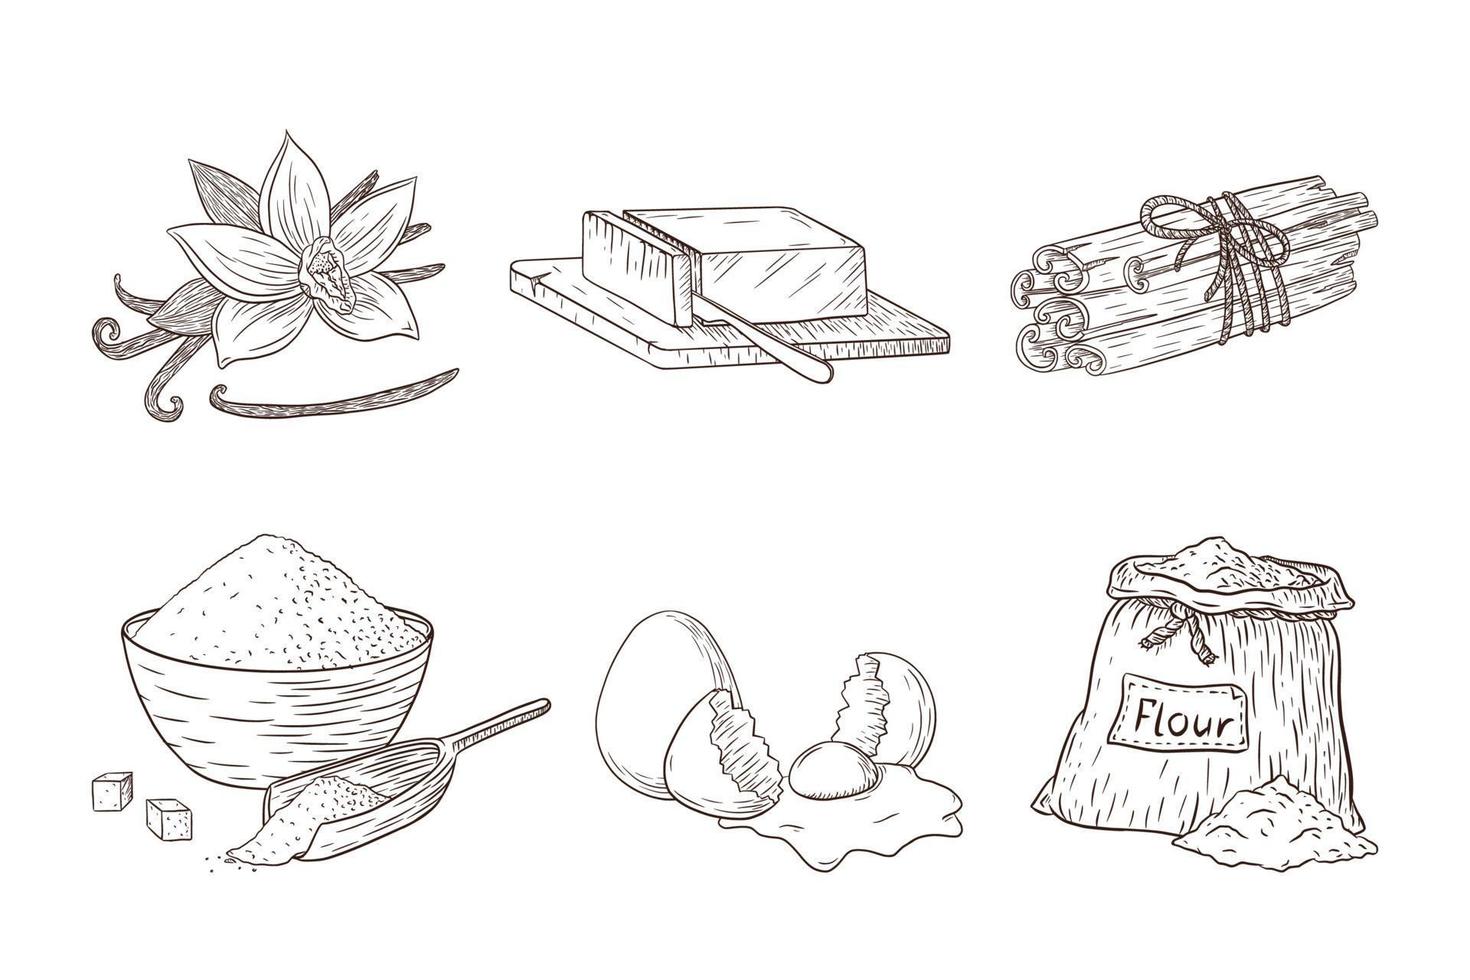 Baking Ingredients Engraved Illustrations Set. Collection of hand drawn food sketches for logo, recipe, sticker, print, bakery menu design and decoration vector